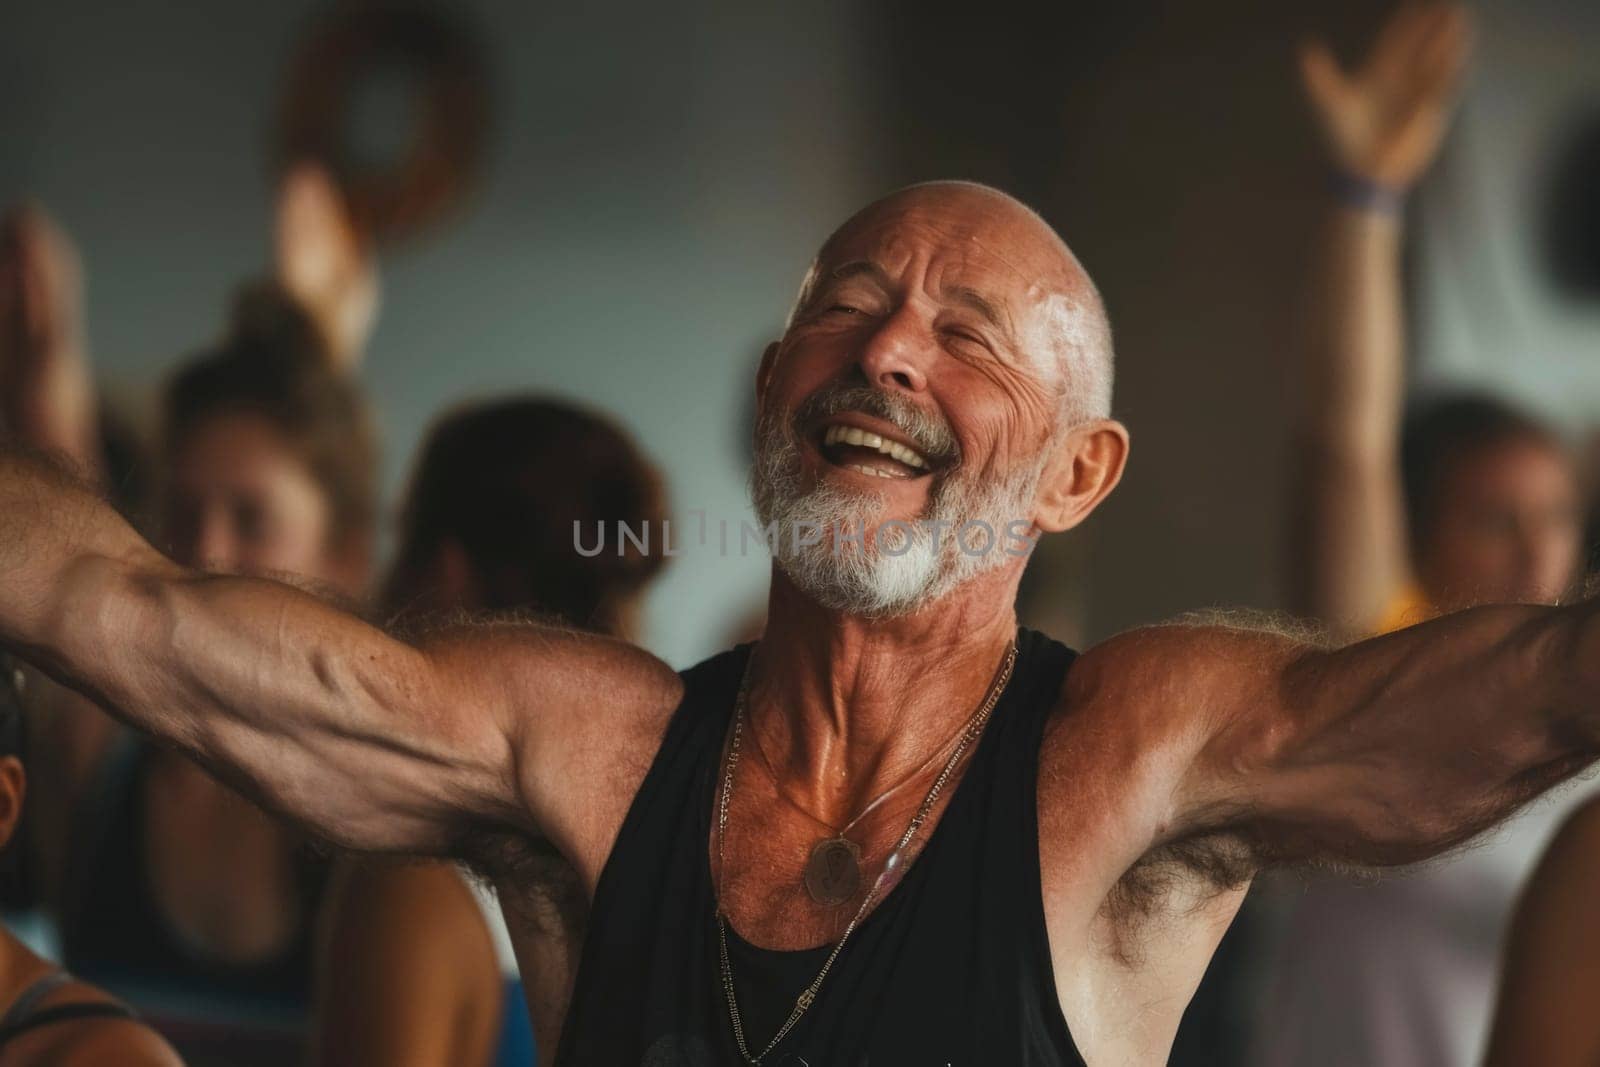 A senior fitness coach radiates joy while leading an energetic workout class. Age is just a number when it comes to inspiring health and vitality